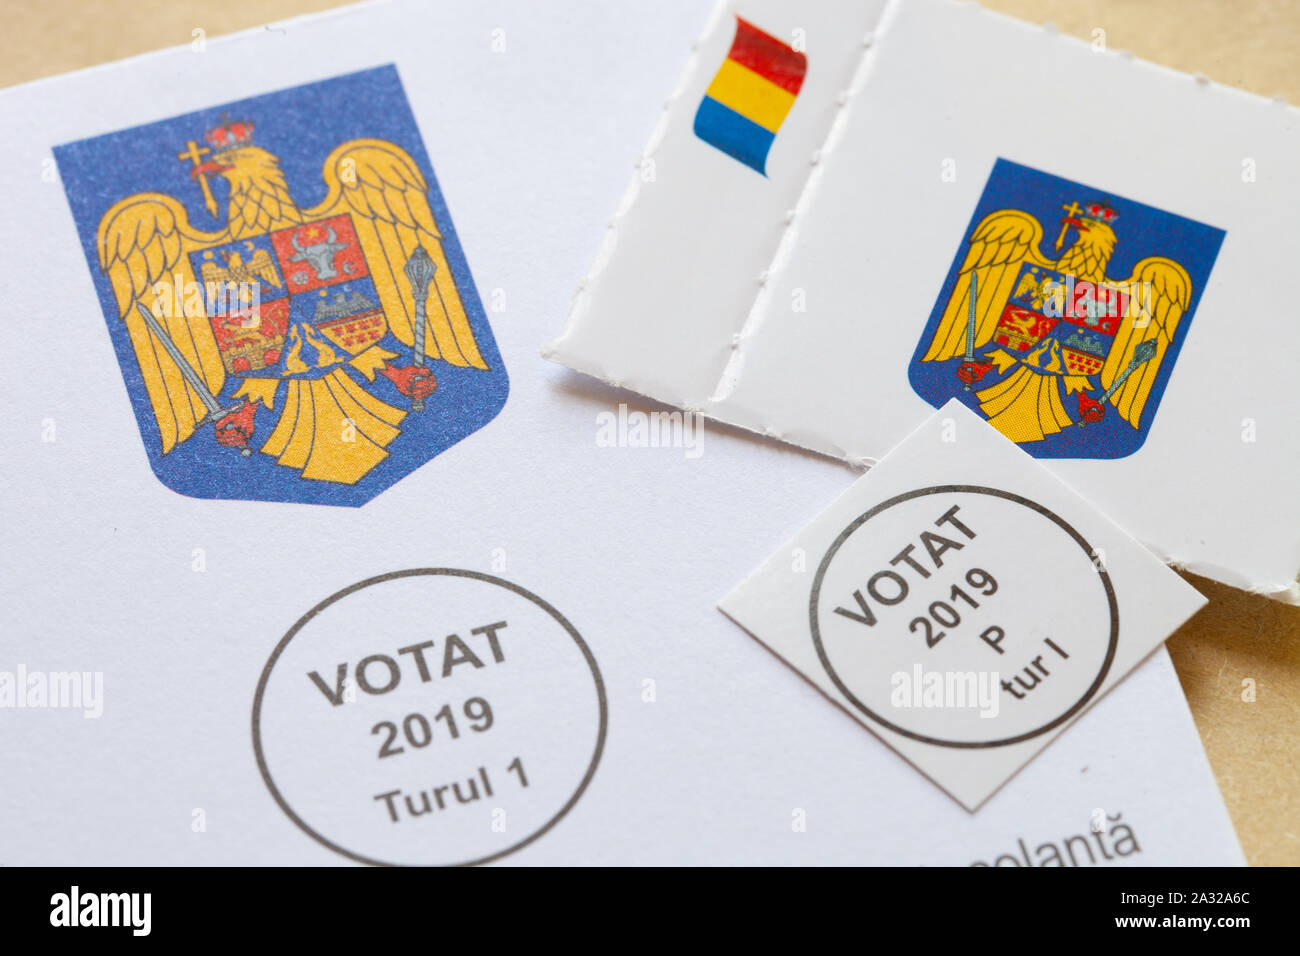 SAN ANTONIO, TEXAS - OCTOBER 4, 2019 - Envelope and seal with Romania's logo for presidential elections held in November.  Casting vote by mail Stock Photo